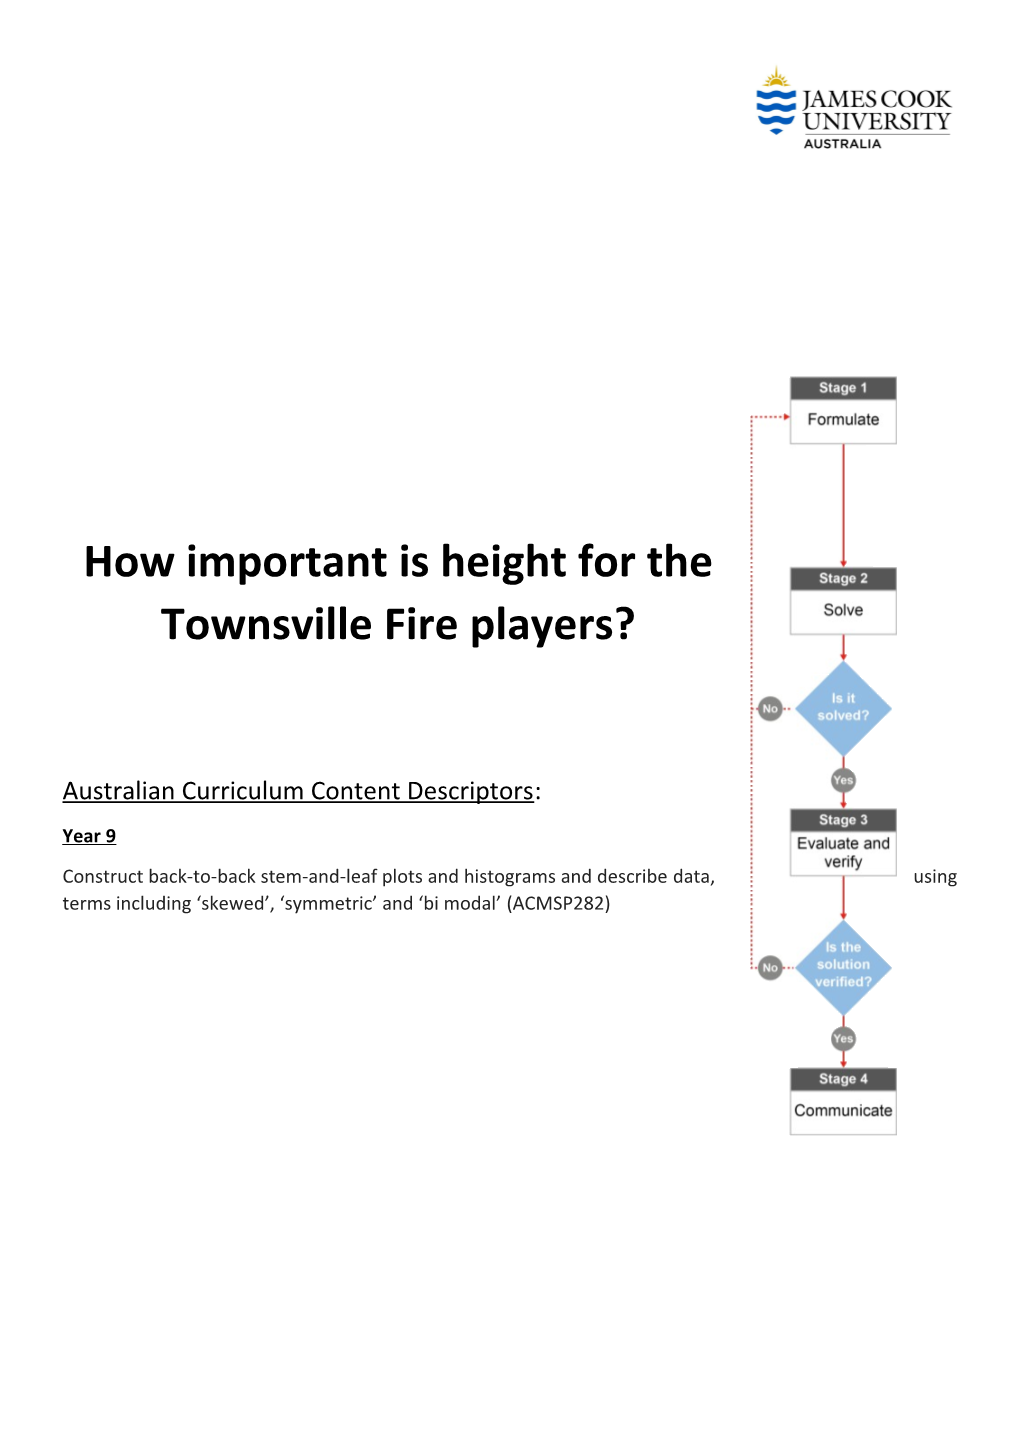 How Important Is Height for the Townsville Fire Players?